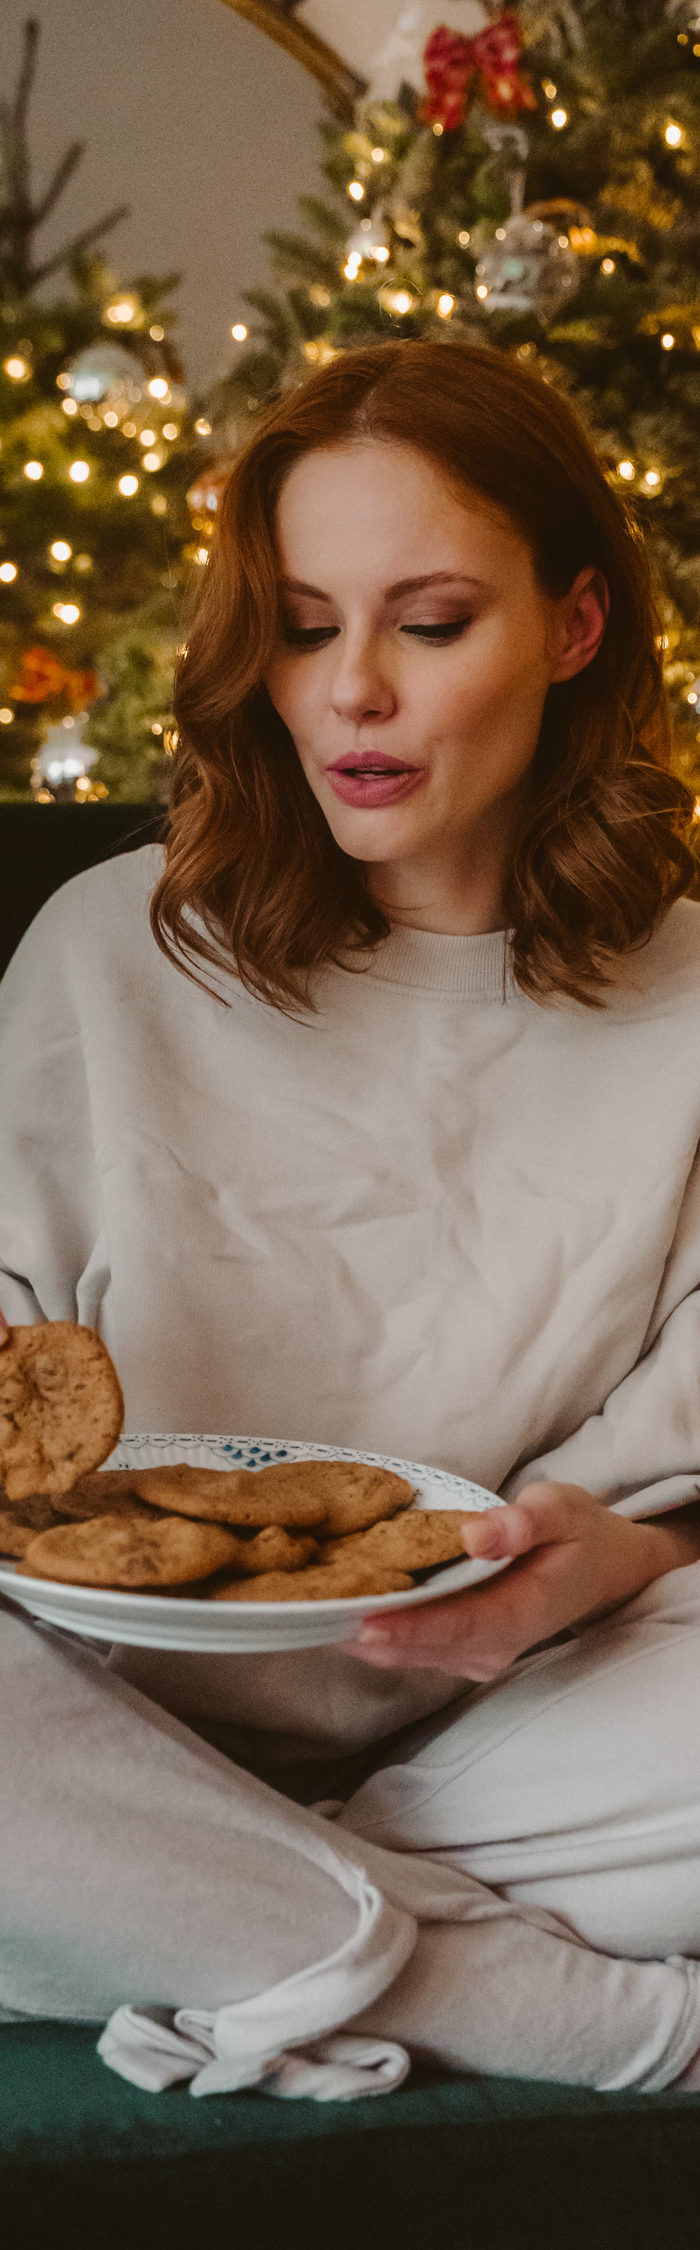 Miss USA 2011 Alyssa Campanella of The A List blog shares her chocolate chip cookie recipe